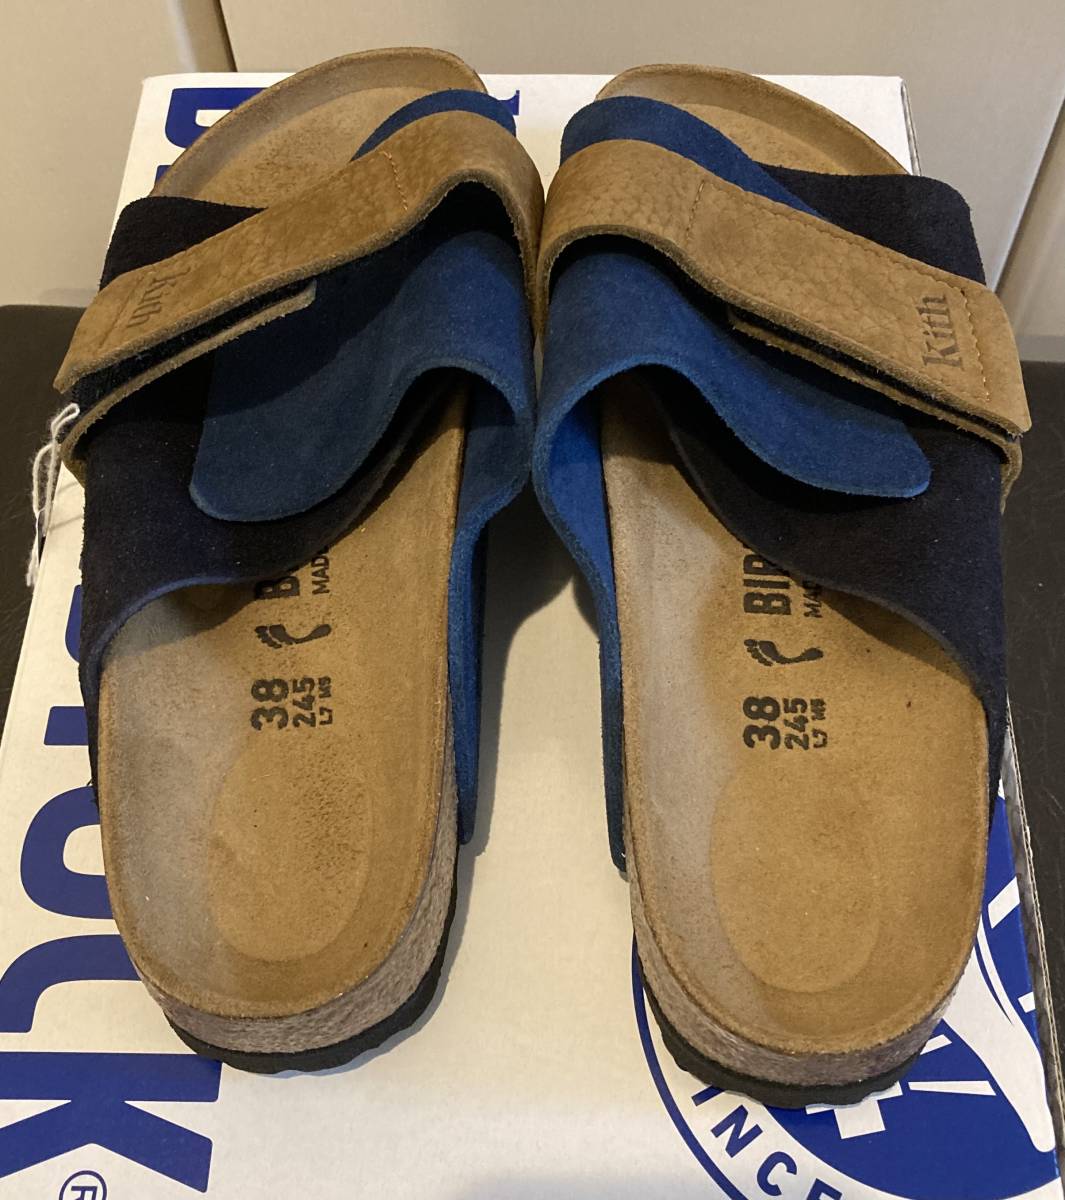 KITH for Birkenstock Kyoto Suede Midnight キス ビルケンシュトック